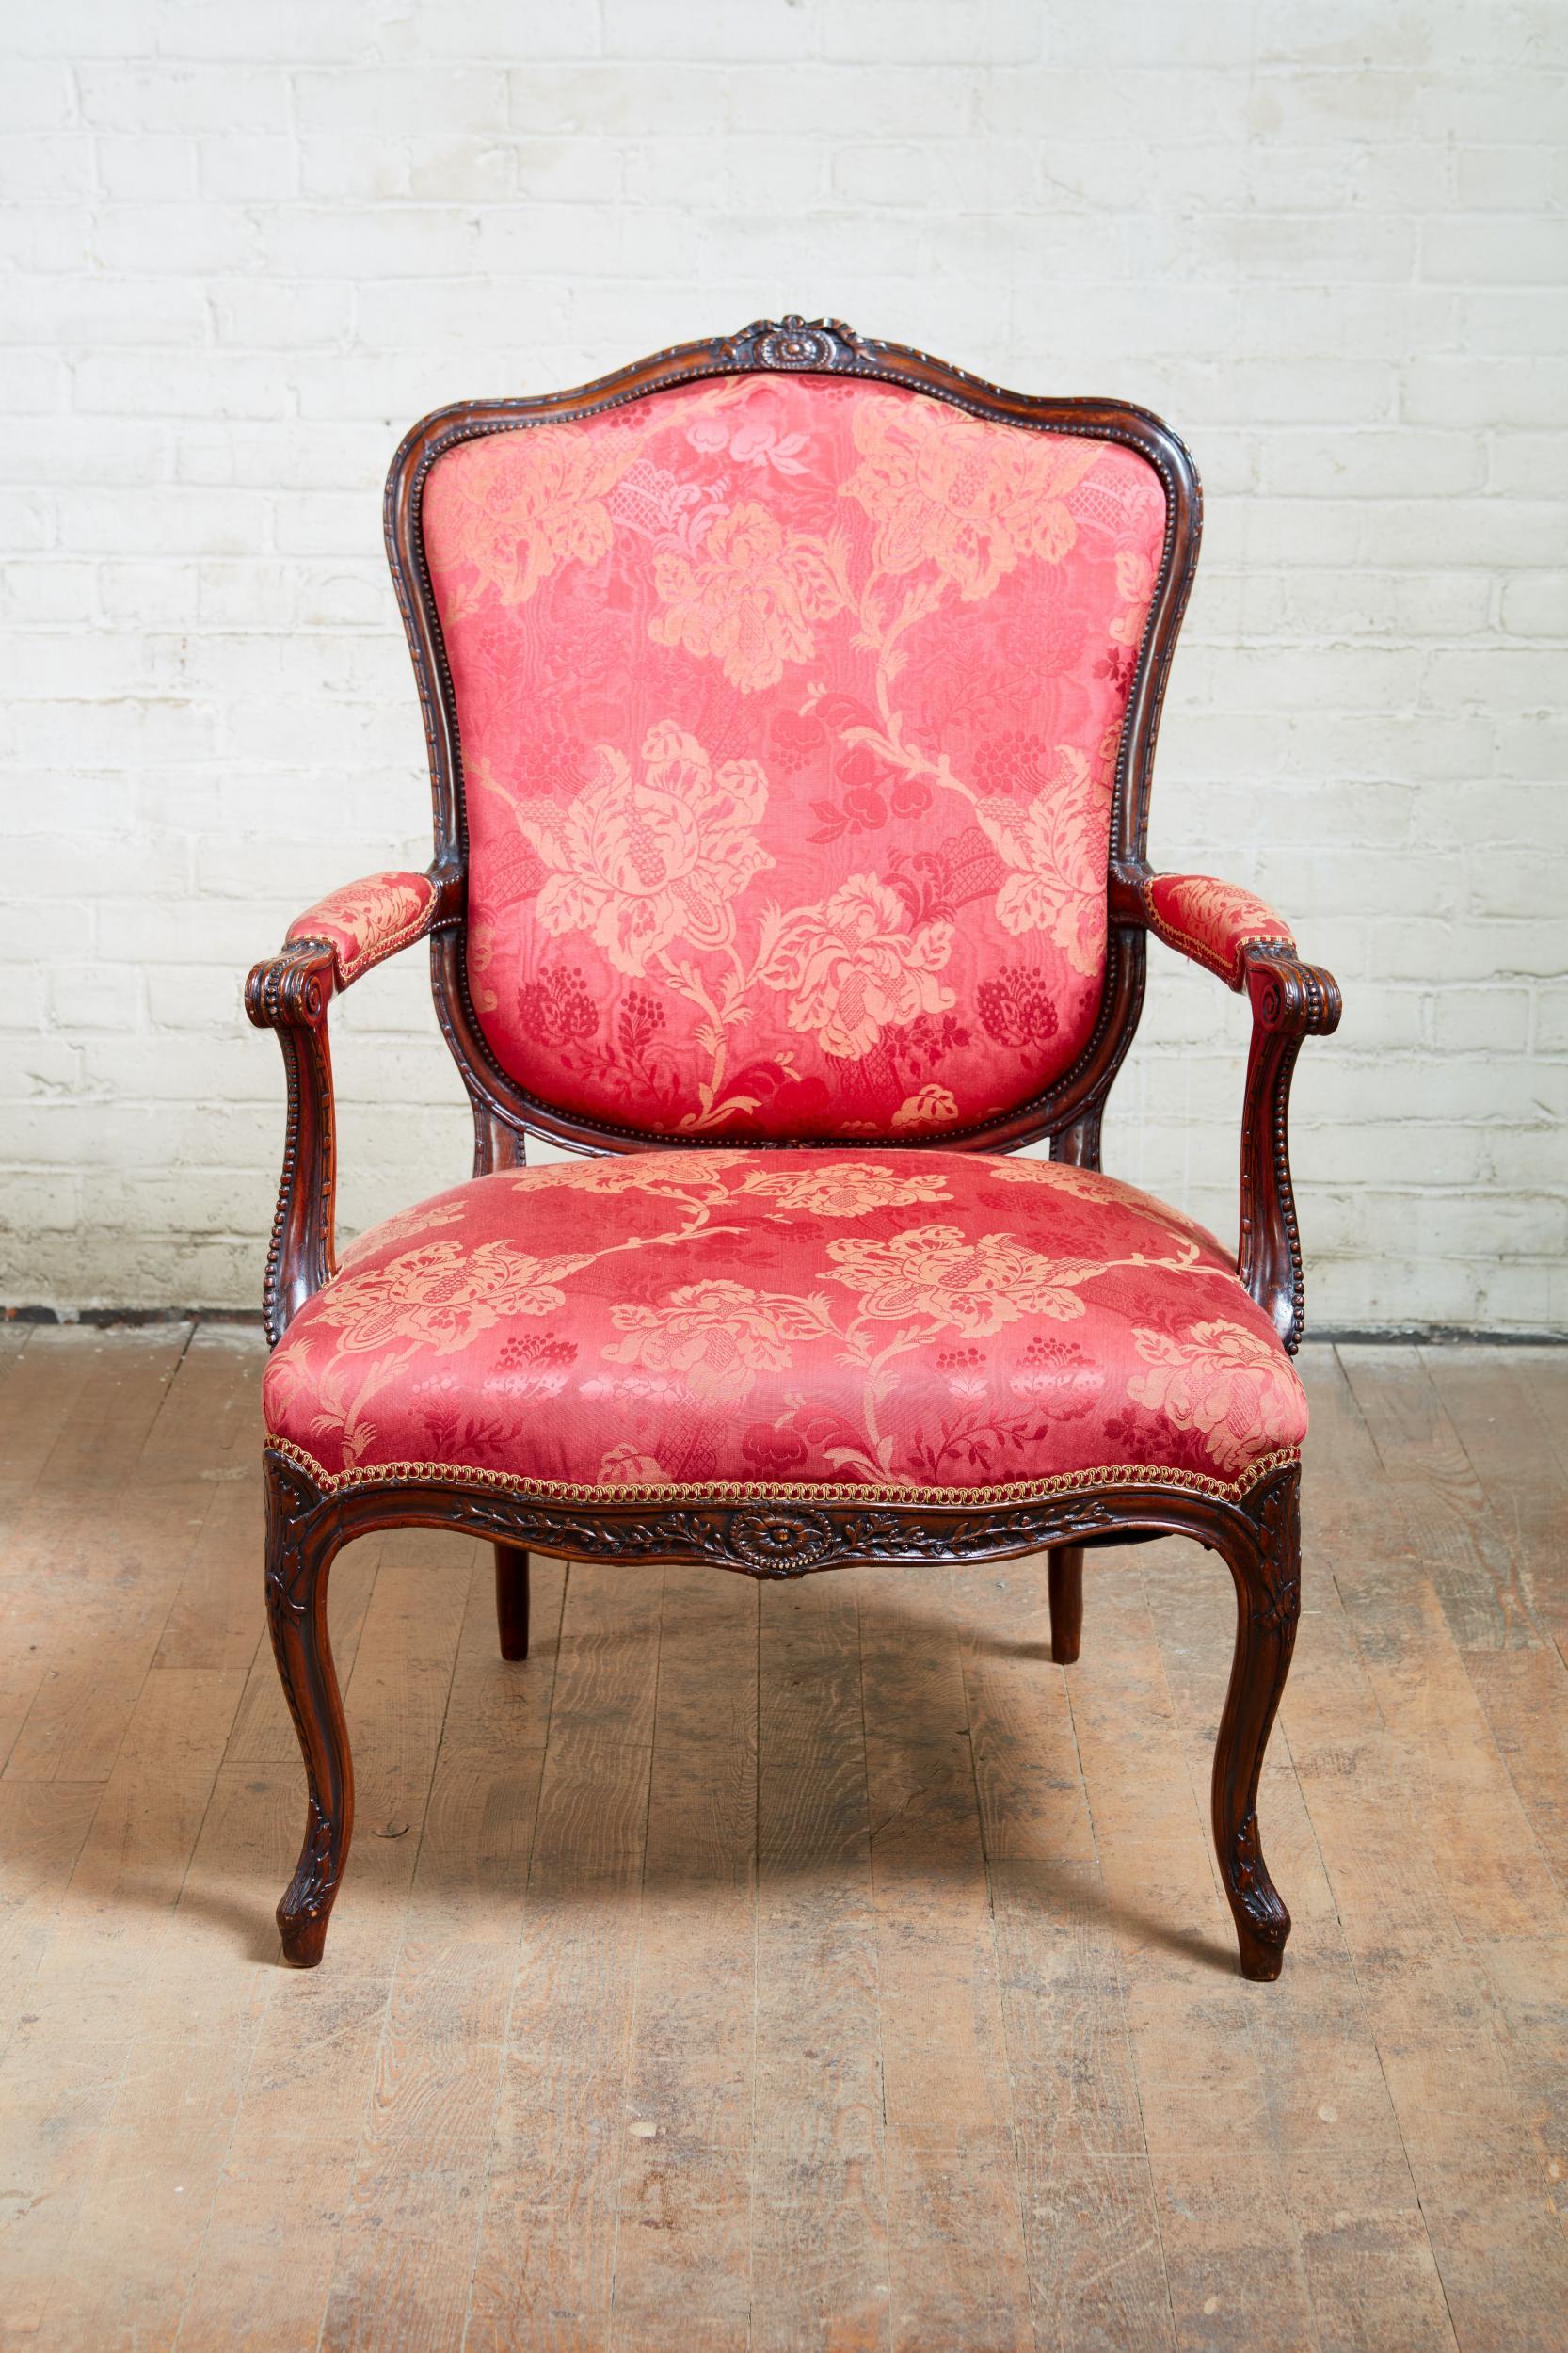 Very fine and overscale George III armchair in the manner of John Linnell, having shaped back with paterae and ribbon carved crest, over a removable upholstered panel, the frame with edges of ribbon tied ribbing and beading, the scrolled arms